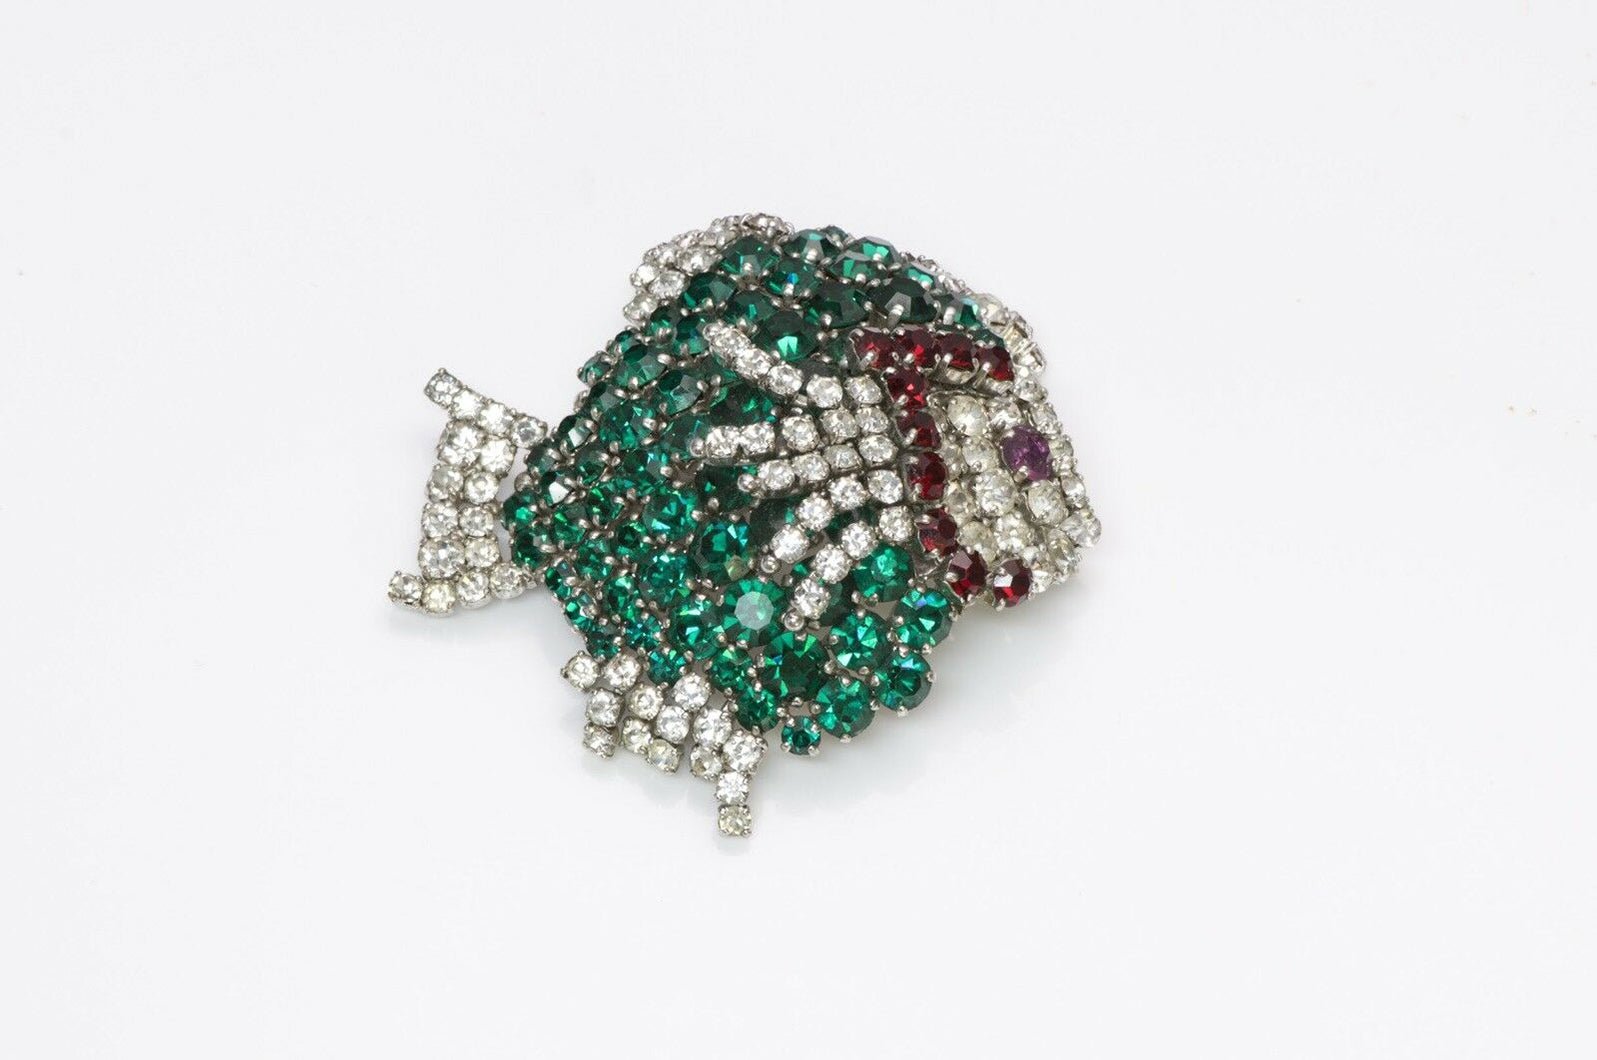 Christian Dior Henkel and Grosse 1961 Green Crystal Fish Brooch